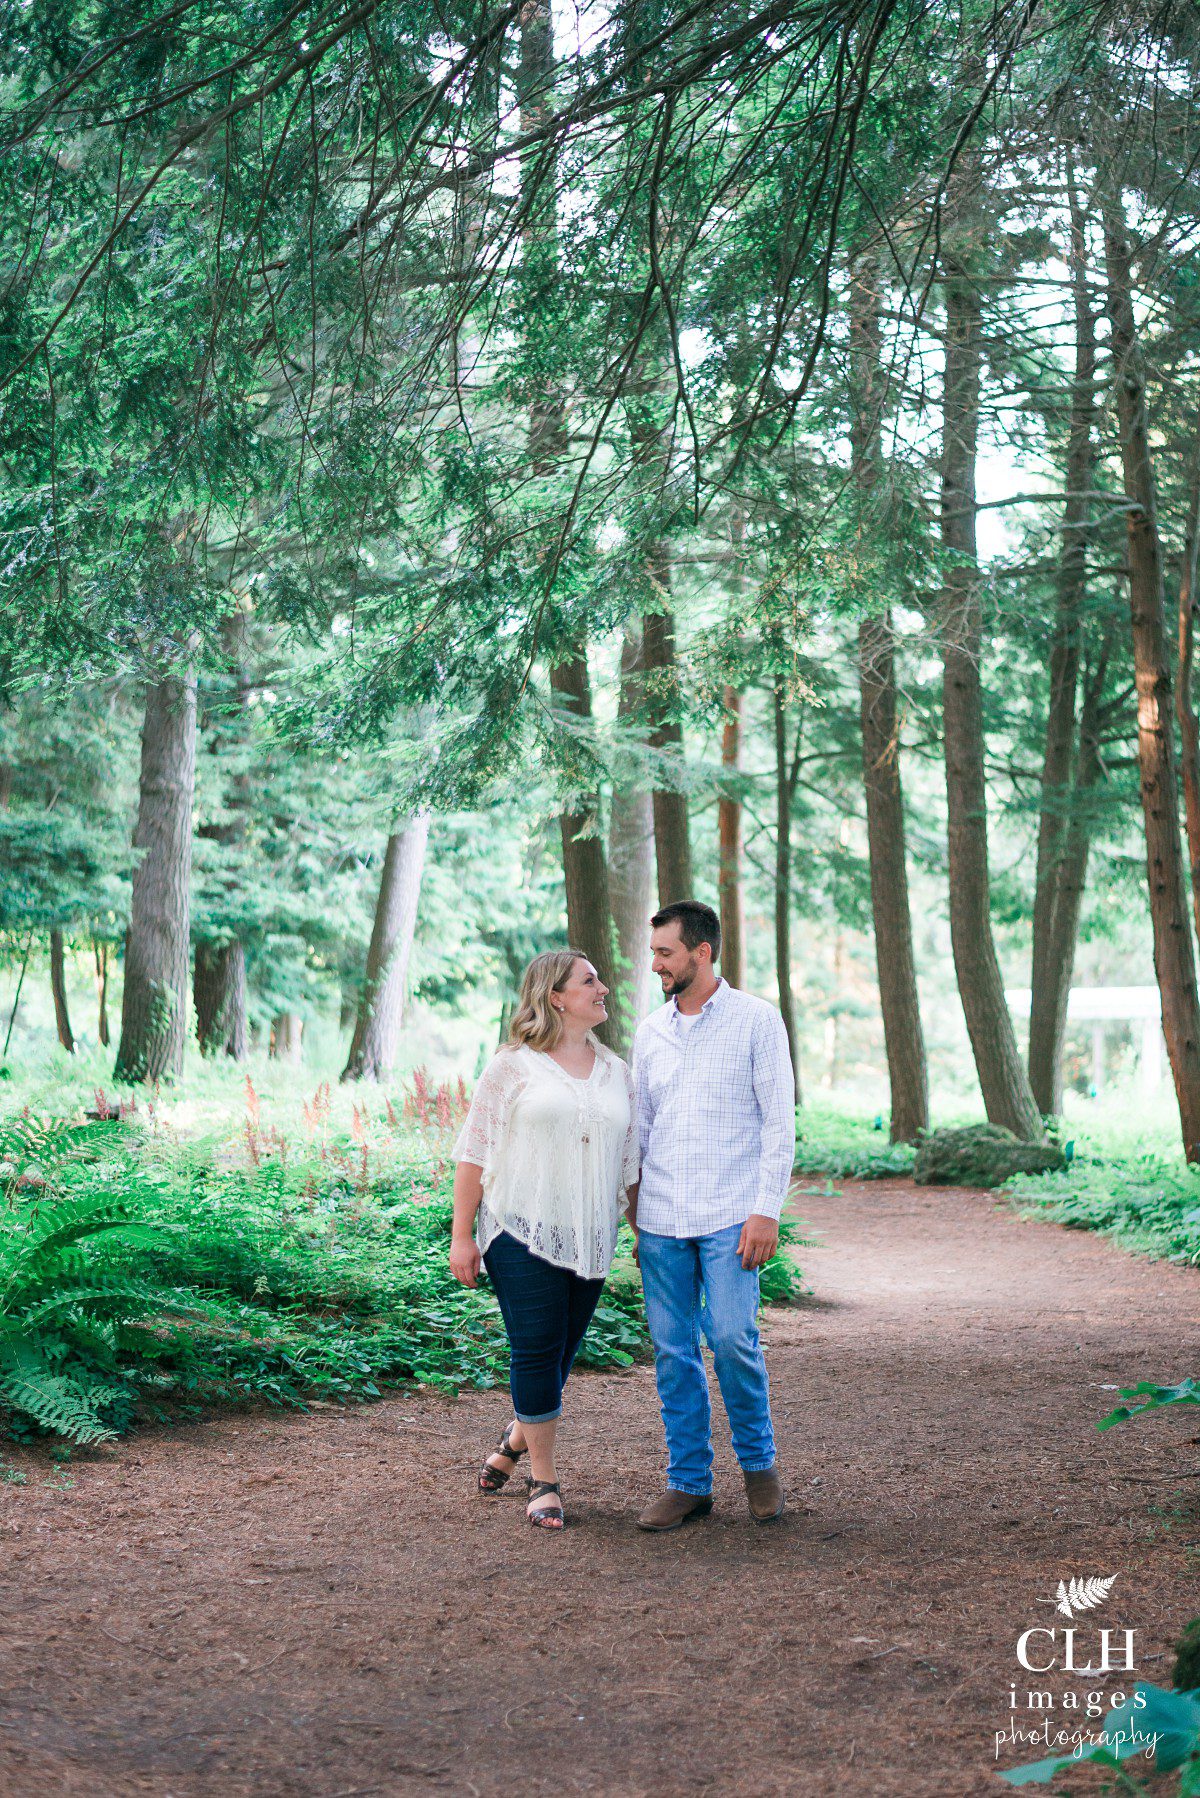 CLH images Photography - Engagement Photographer - Engagement Photos - Saratoga NY Photography - Yaddo Gardens - Erica and Jeff (23)